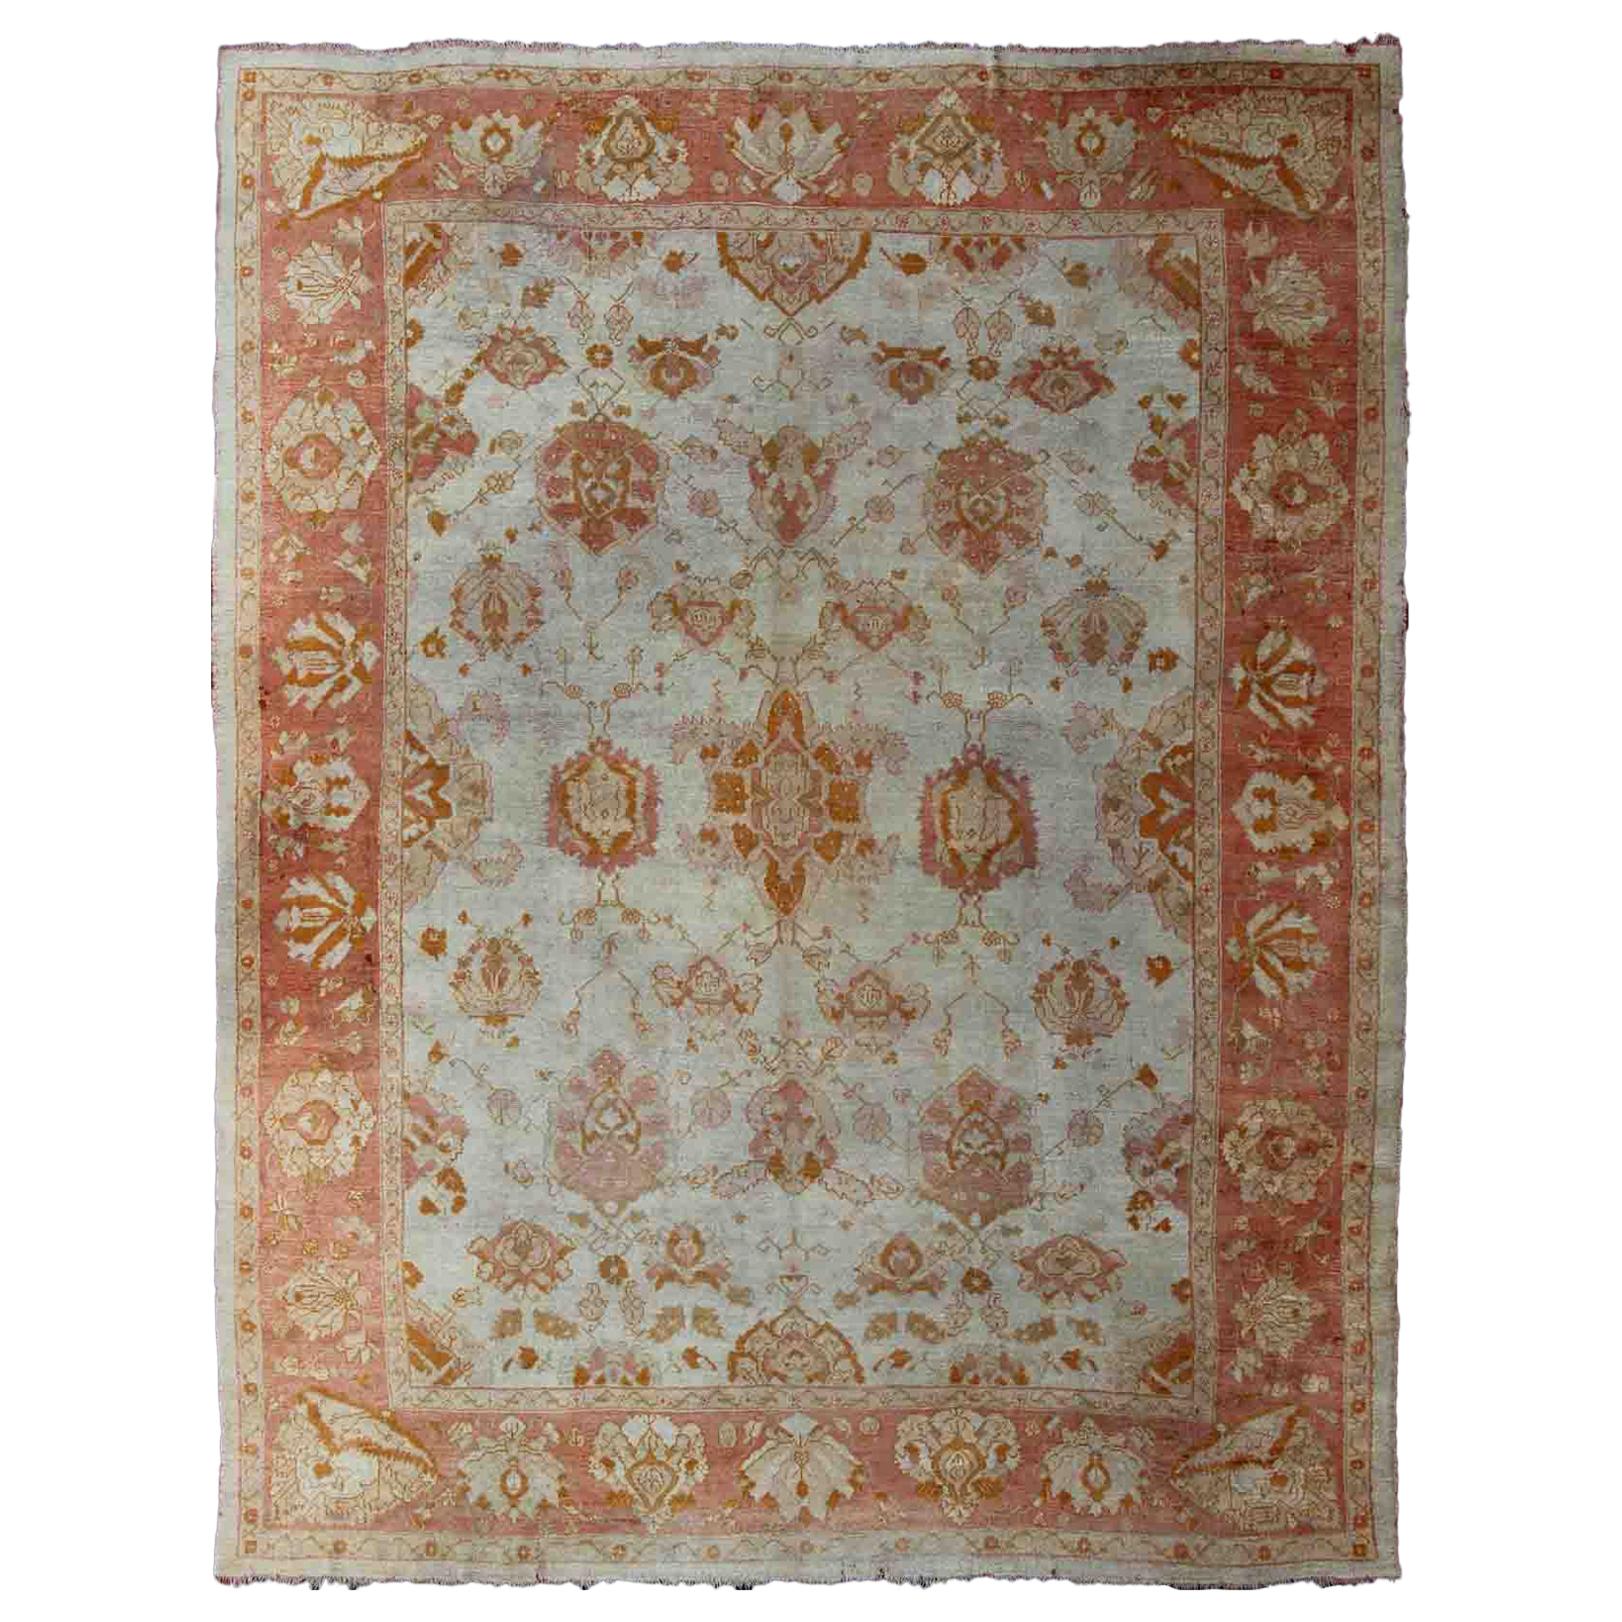 Antique Turkish Oushak Rug with All-Over Design in Ivory and Coral-Salmon 